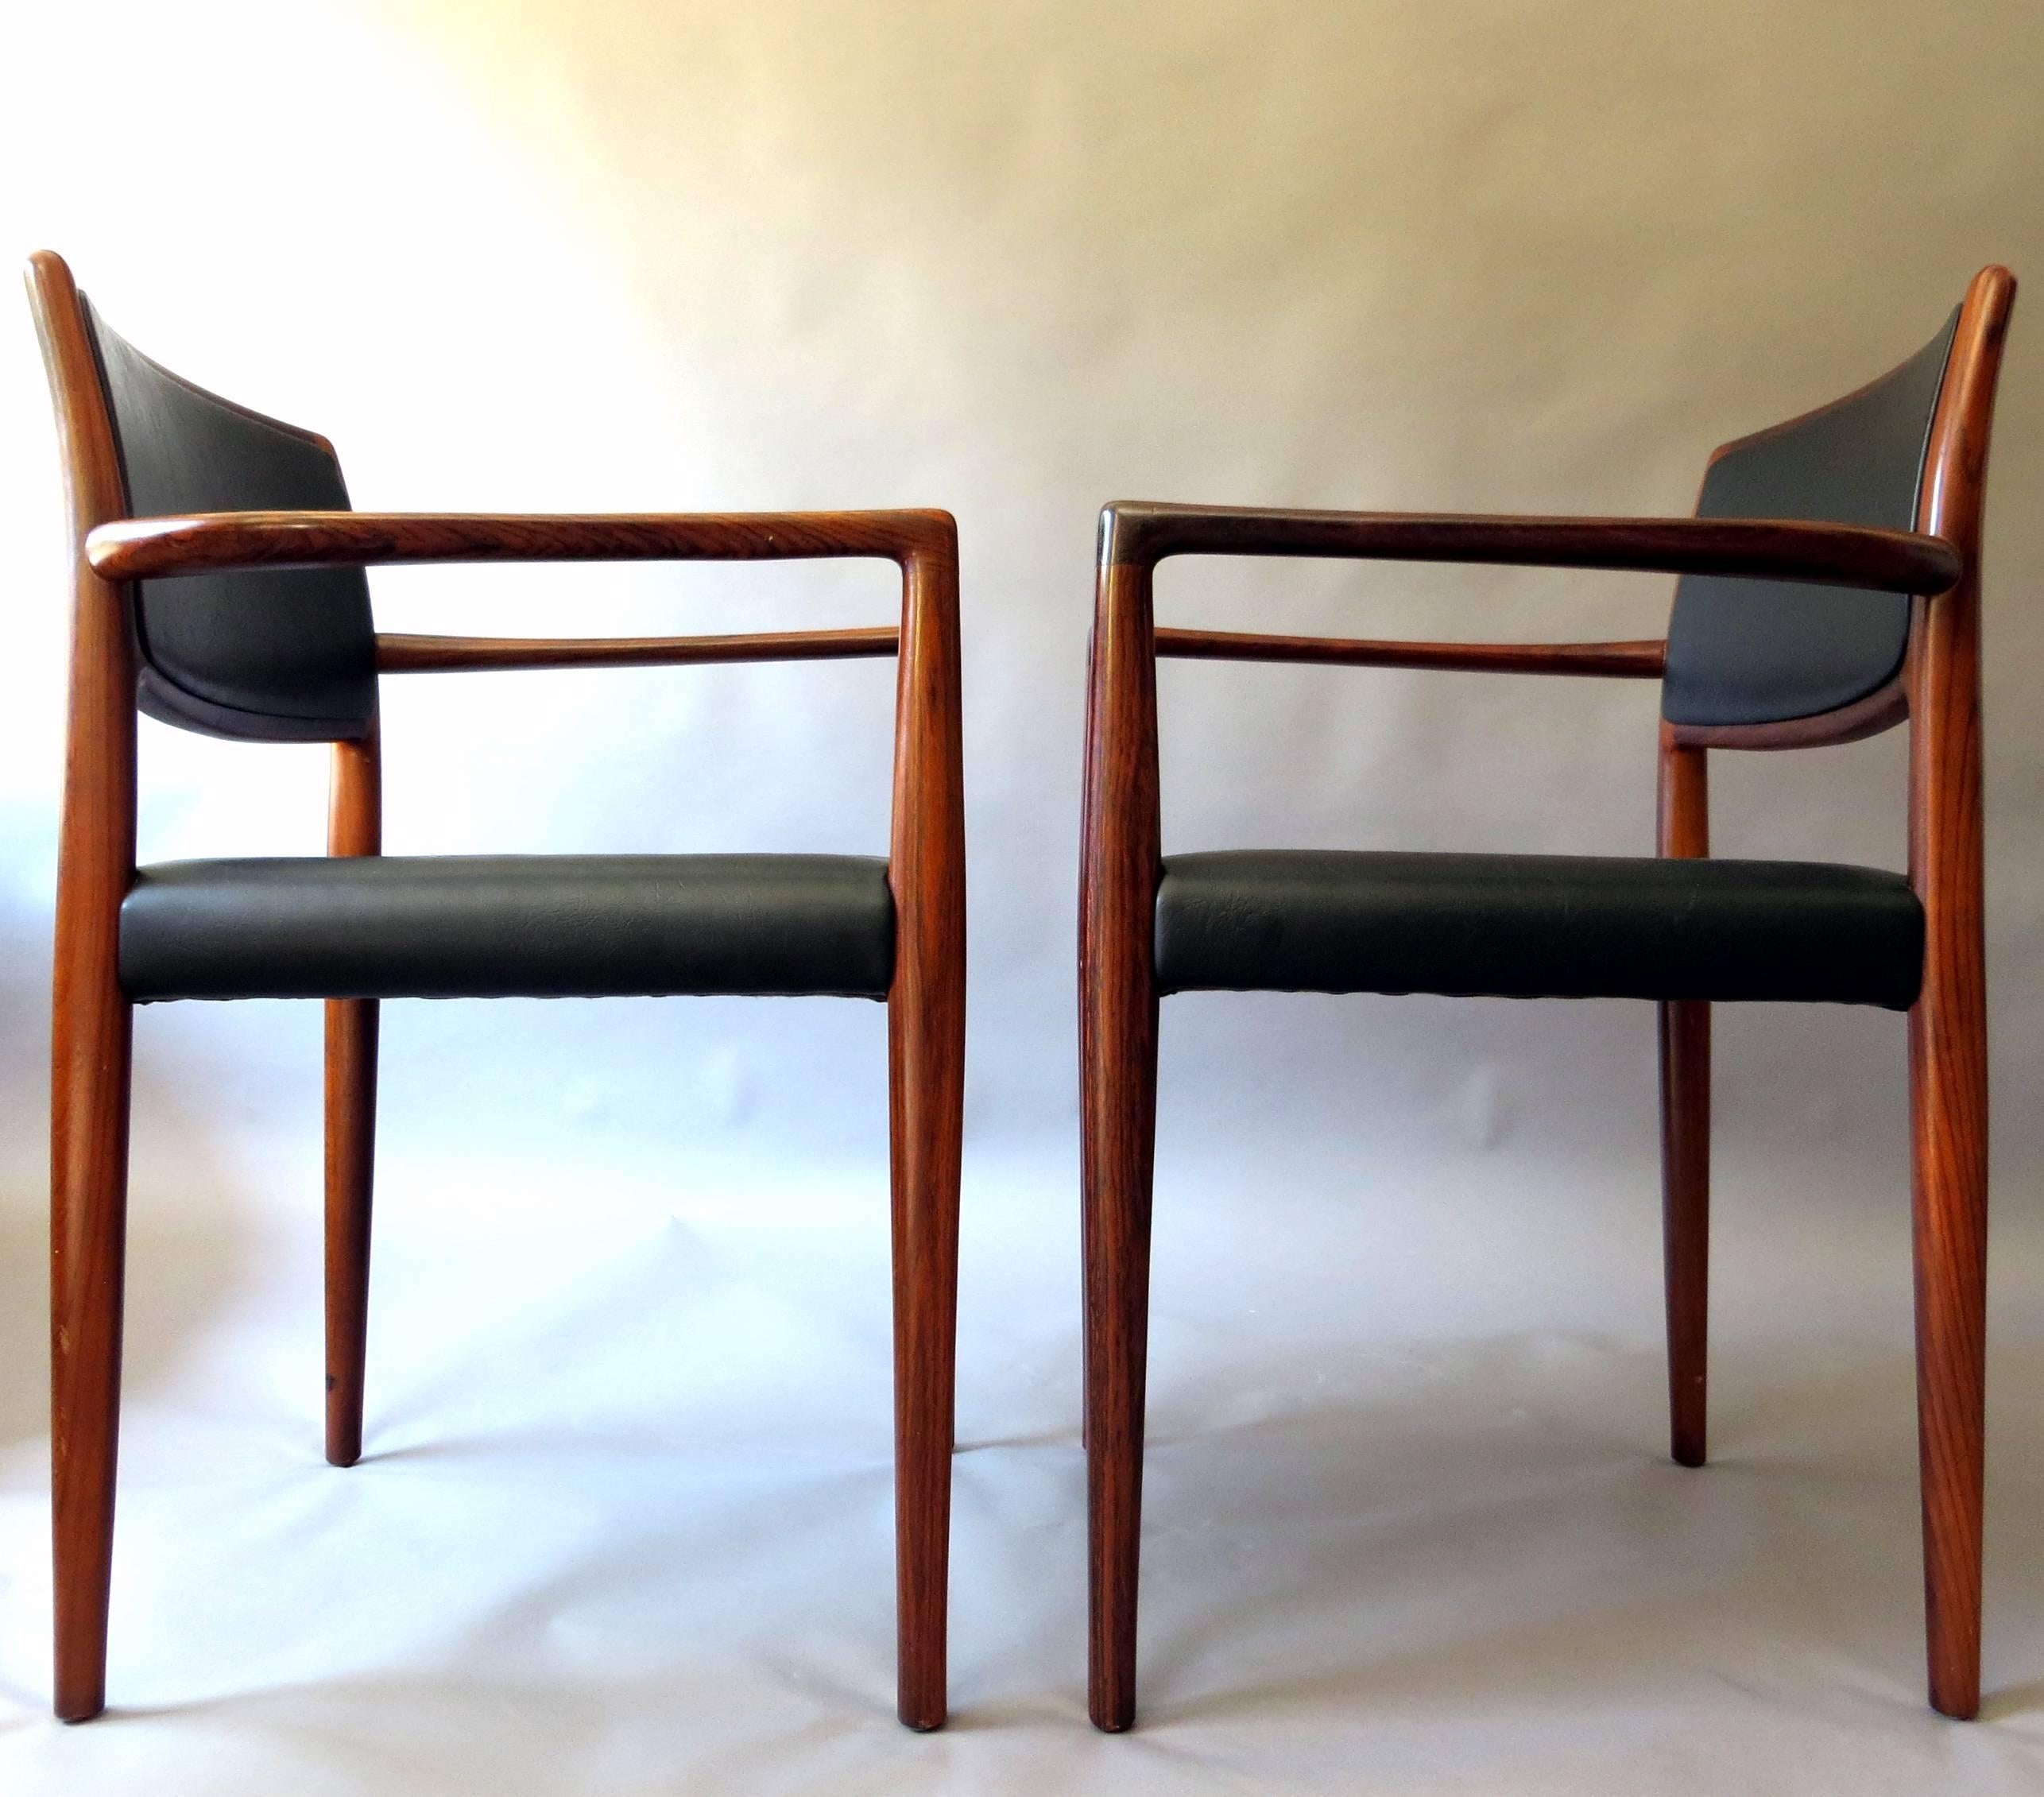 Danish Mid-Century Modern Rosewood and Leather Dining Chairs, Set of Two, 1960s im Zustand „Gut“ im Angebot in Hamburg, DE